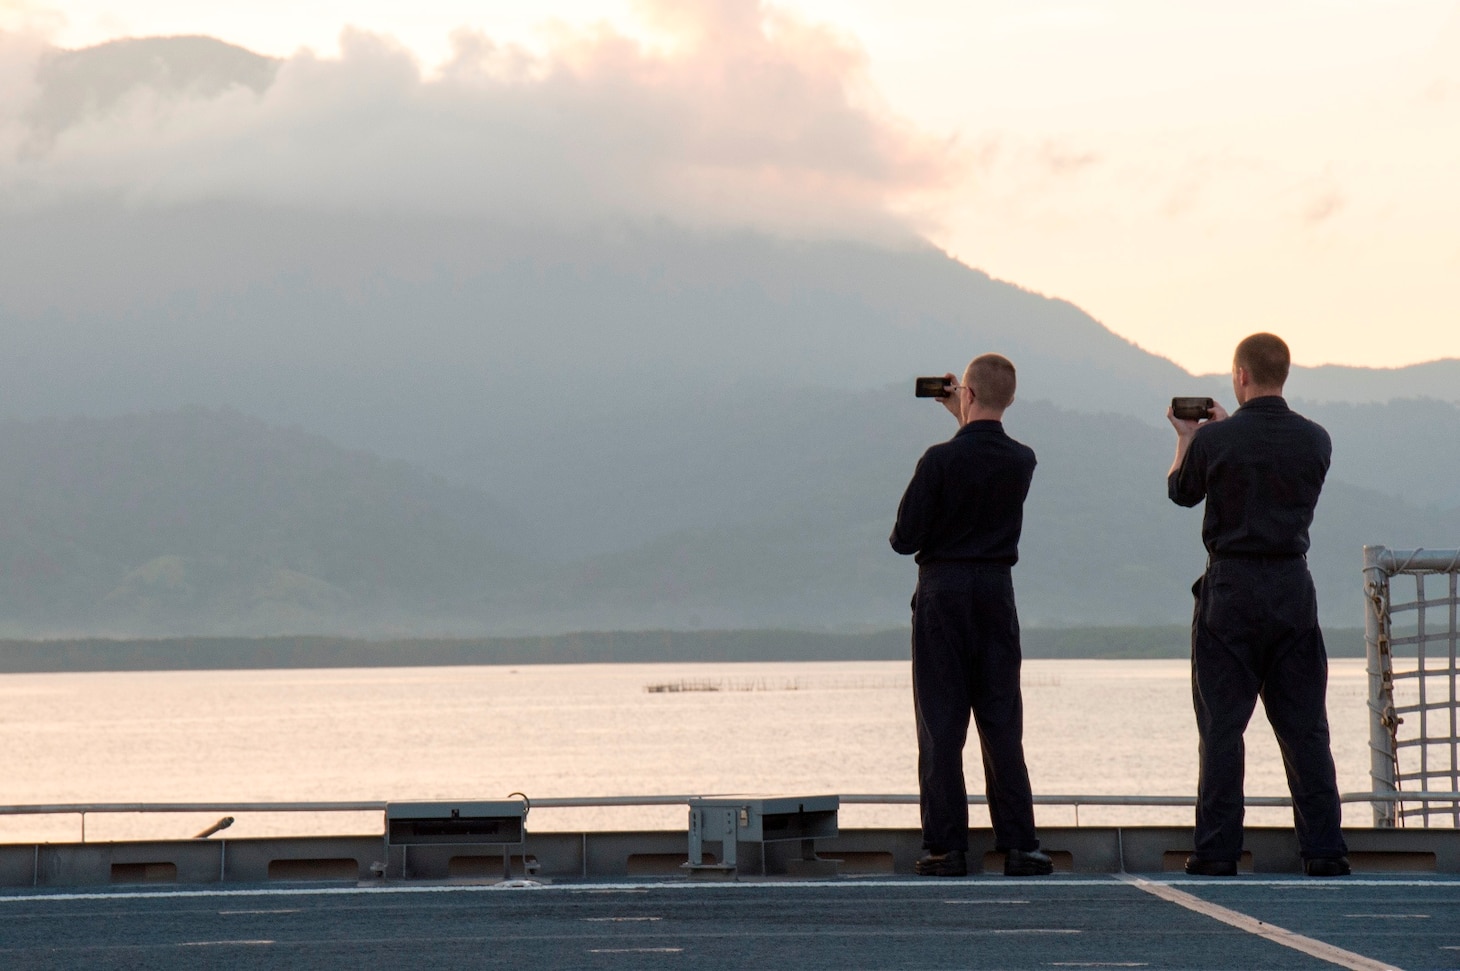 Musician 3rd Class Ian Cooper (left) and Musician 2nd Class Brian Kloppenburg (right) take a photos as USNS Millinocket (T-EPF 3) pulls into Puerto Princesa during a U.S. 7th Fleet theater security cooperation patrol. More than 40 members of the 7th Fleet staff are currently embarked on Millinocket visiting several countries in the Indo-Pacific region.